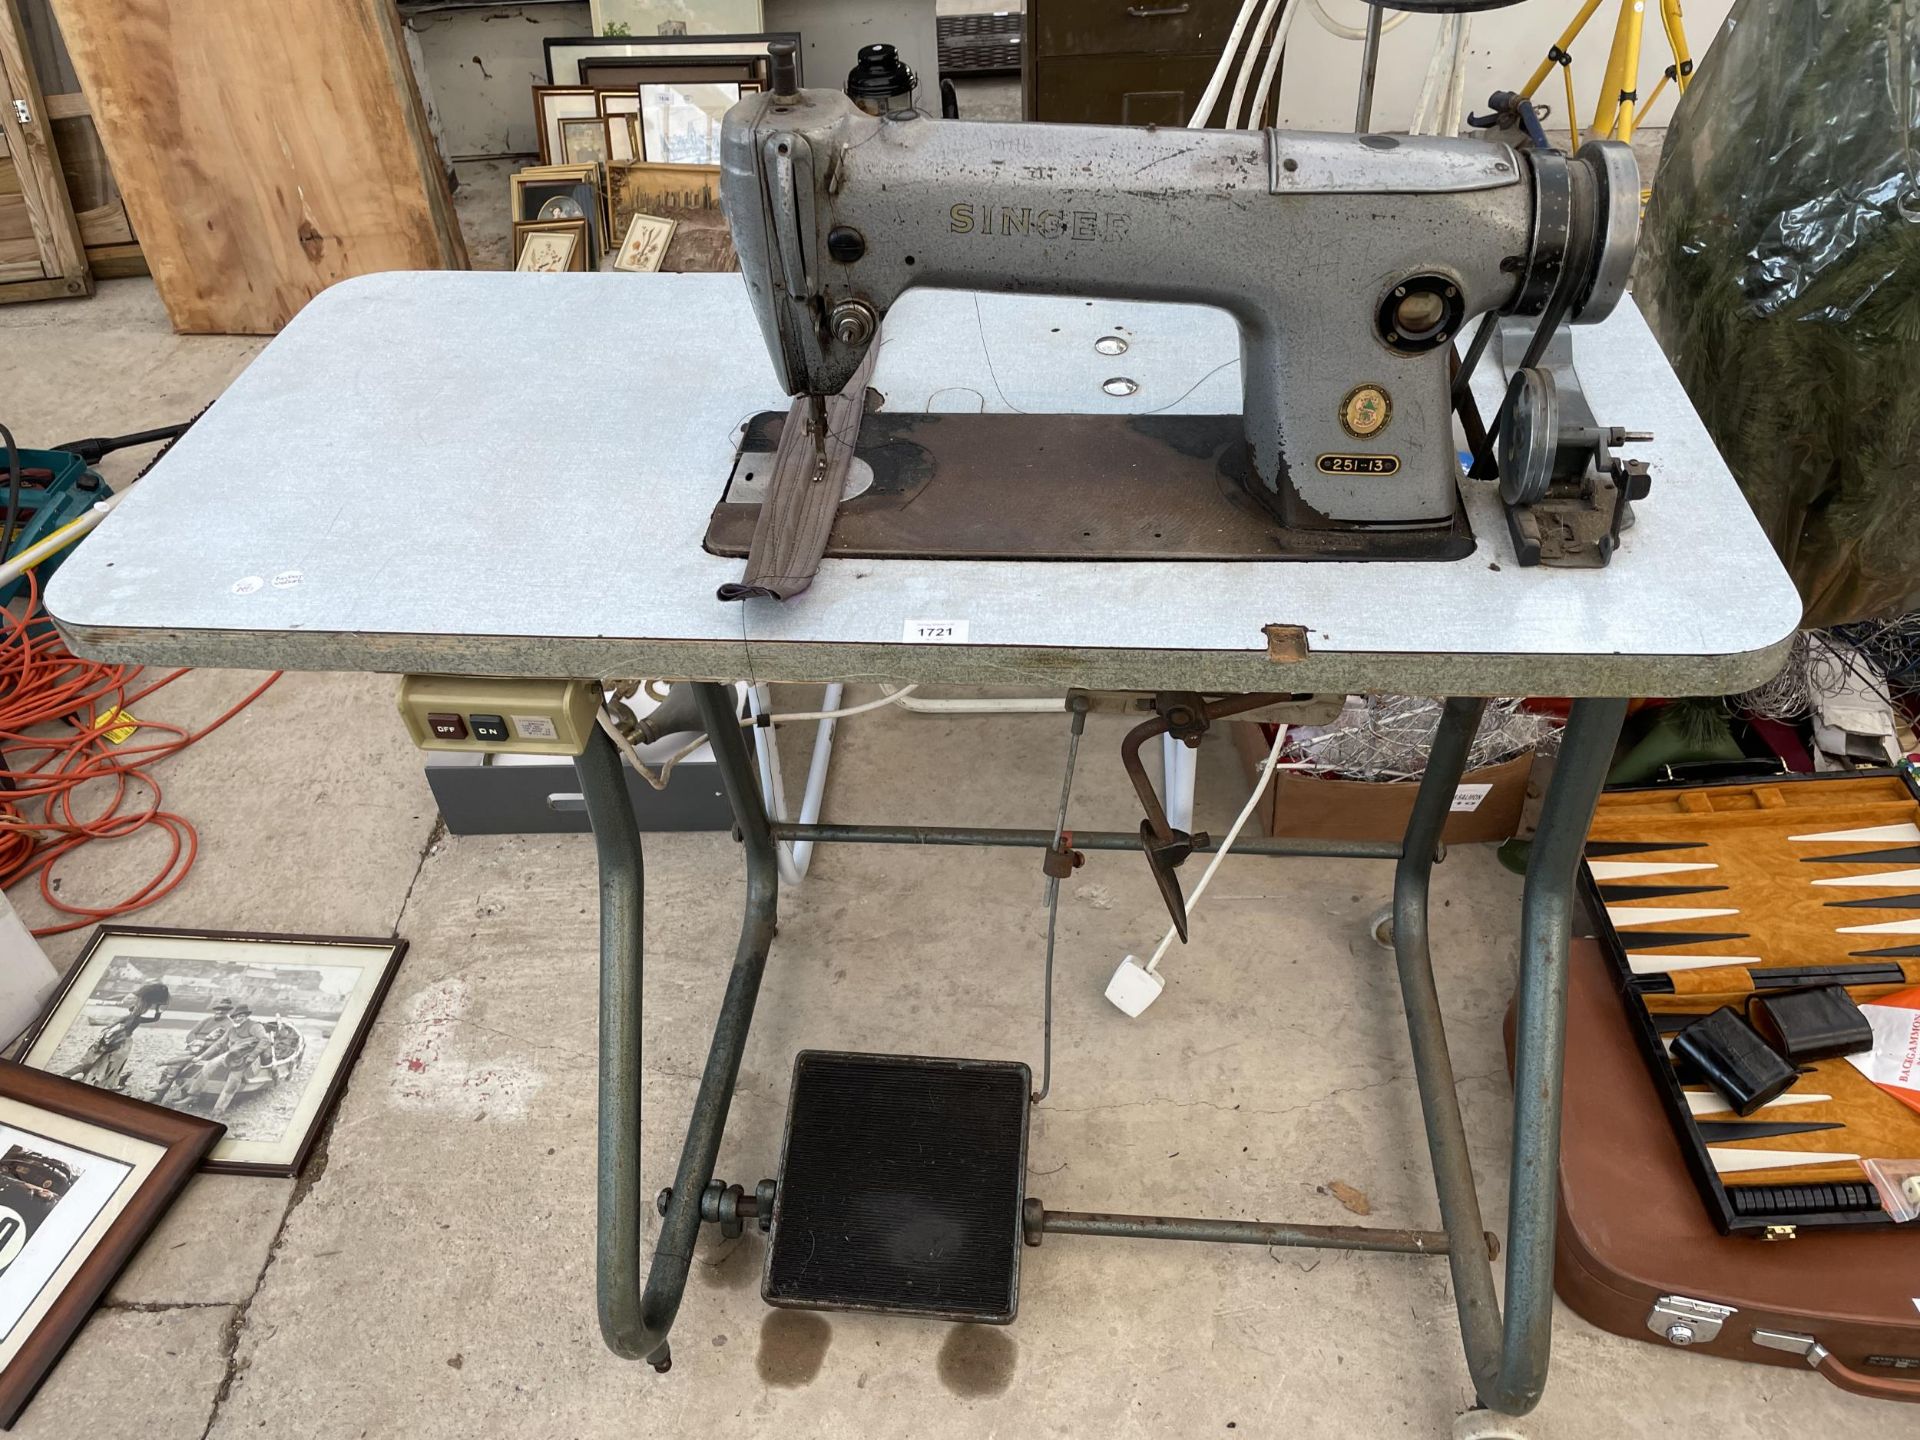 AN INDUSTRIAL SINGER SEWING MACHINE 251-13